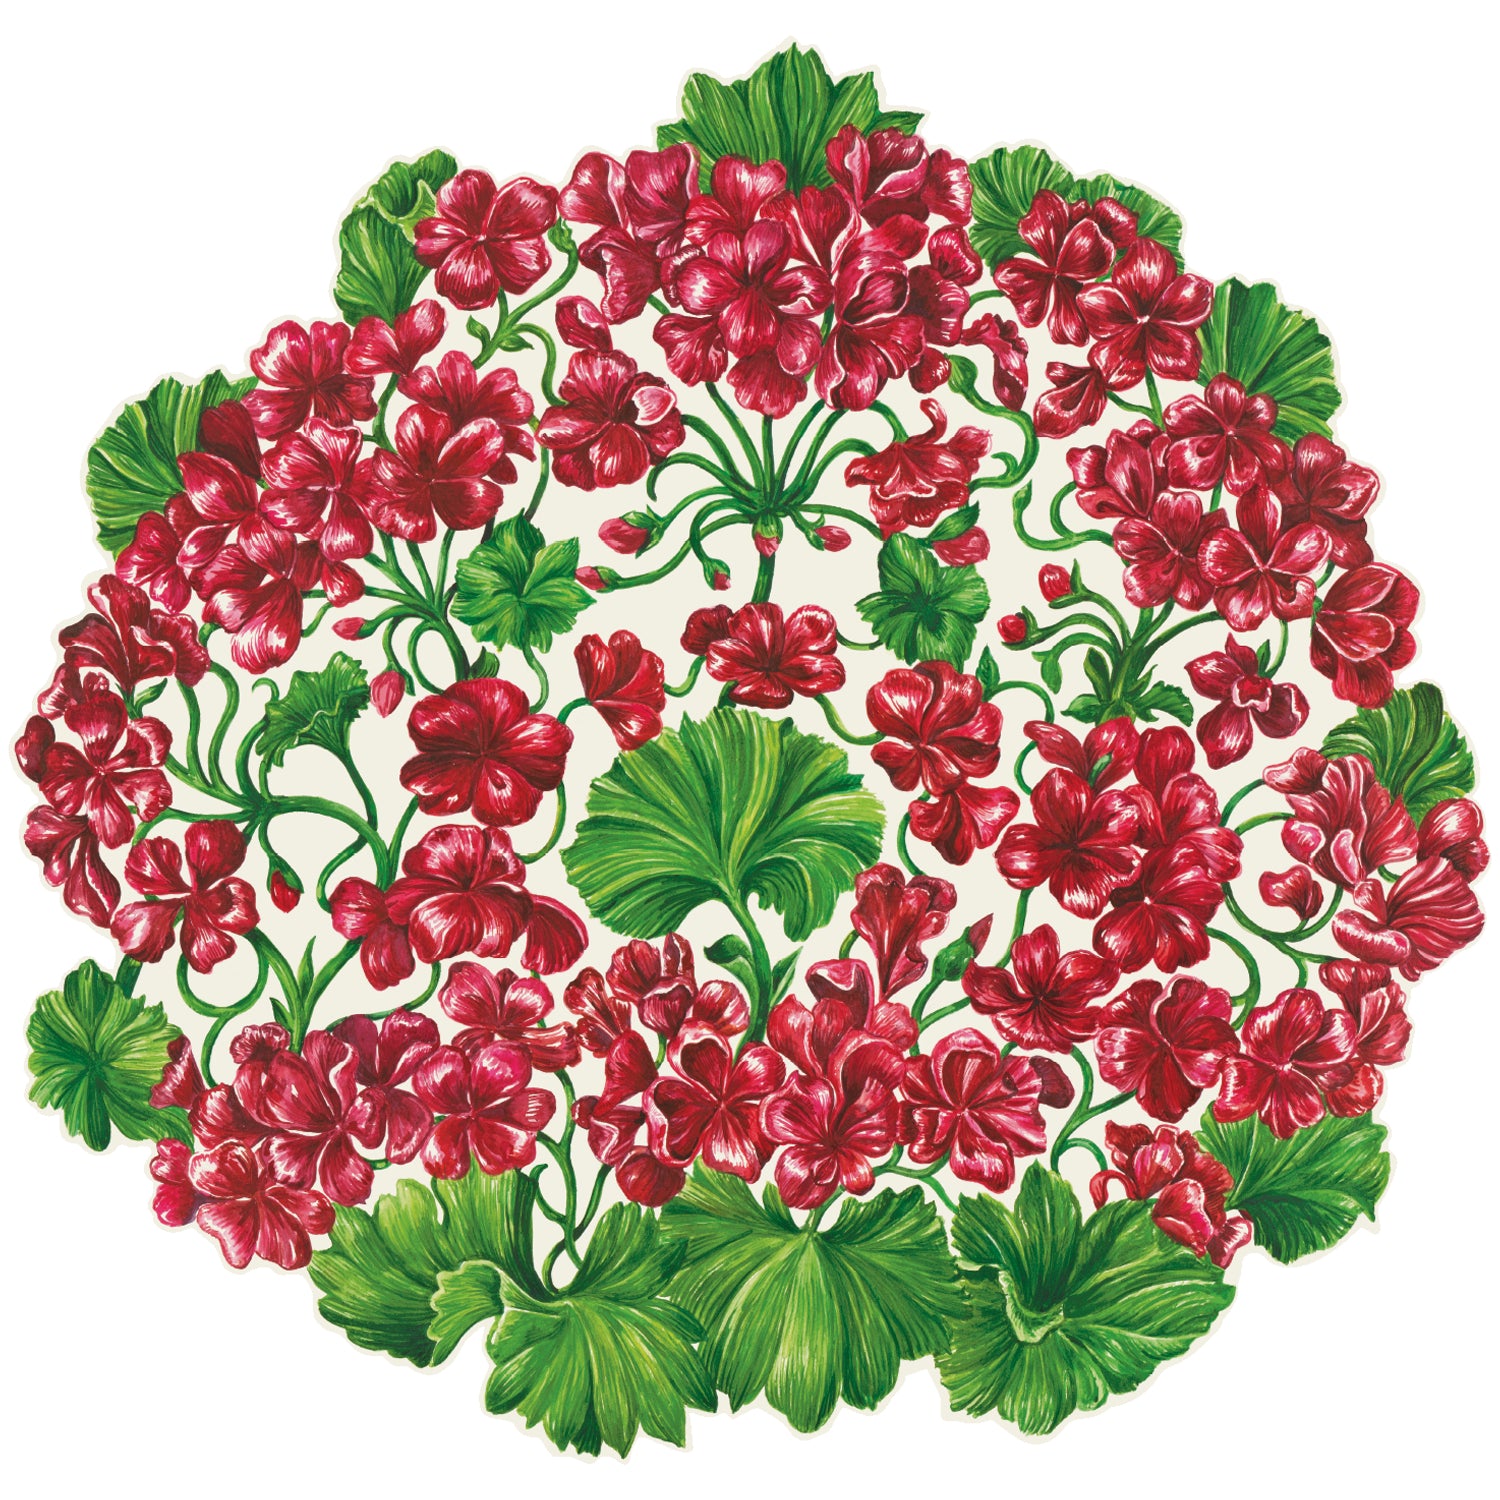 Hester &amp; Cook Die-Cut Geranium Placemat featuring red geraniums in a circle, perfect for summer florals.